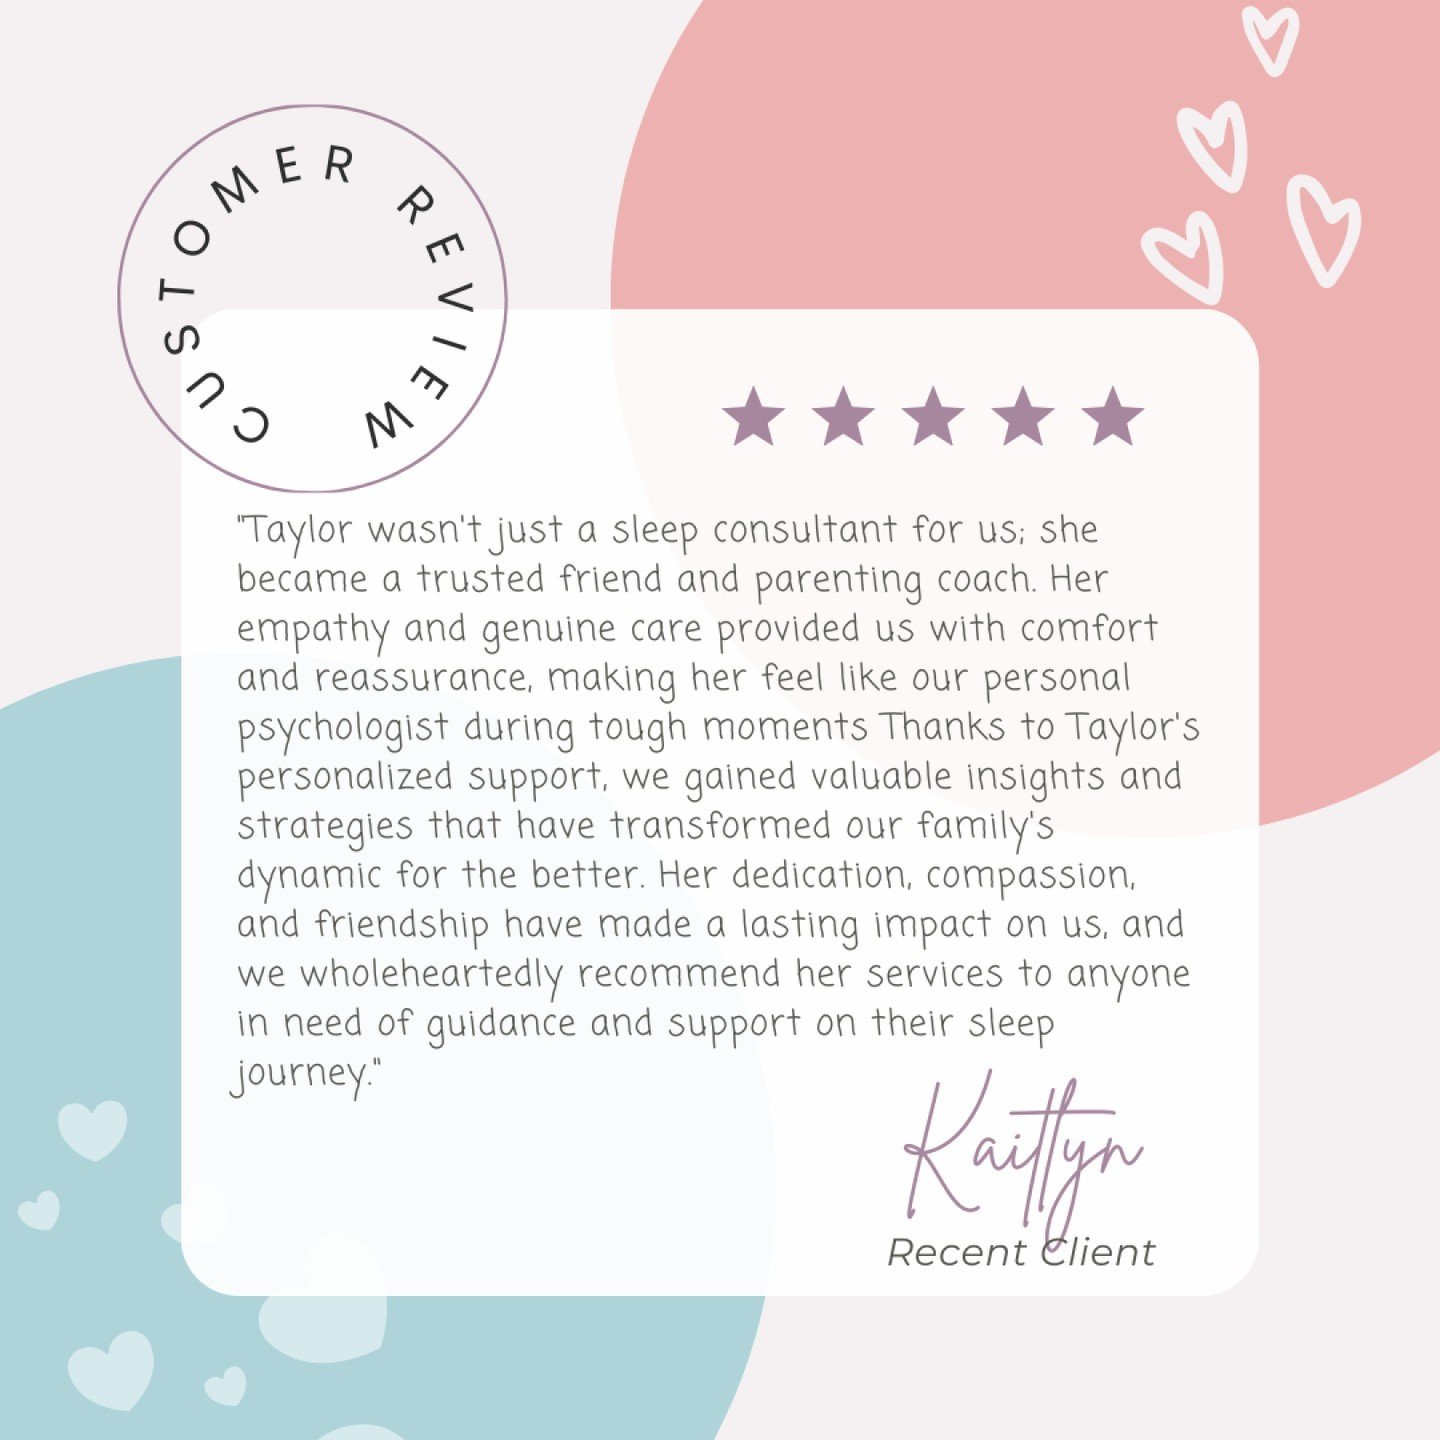 Sometimes these testimonials really make me 😭

Speaking of tears - As a sleep consultant, I'm no stranger to addressing the elephant in the room &ndash; crying. It's a topic that comes up often, and rightfully so. But there's another aspect of this 